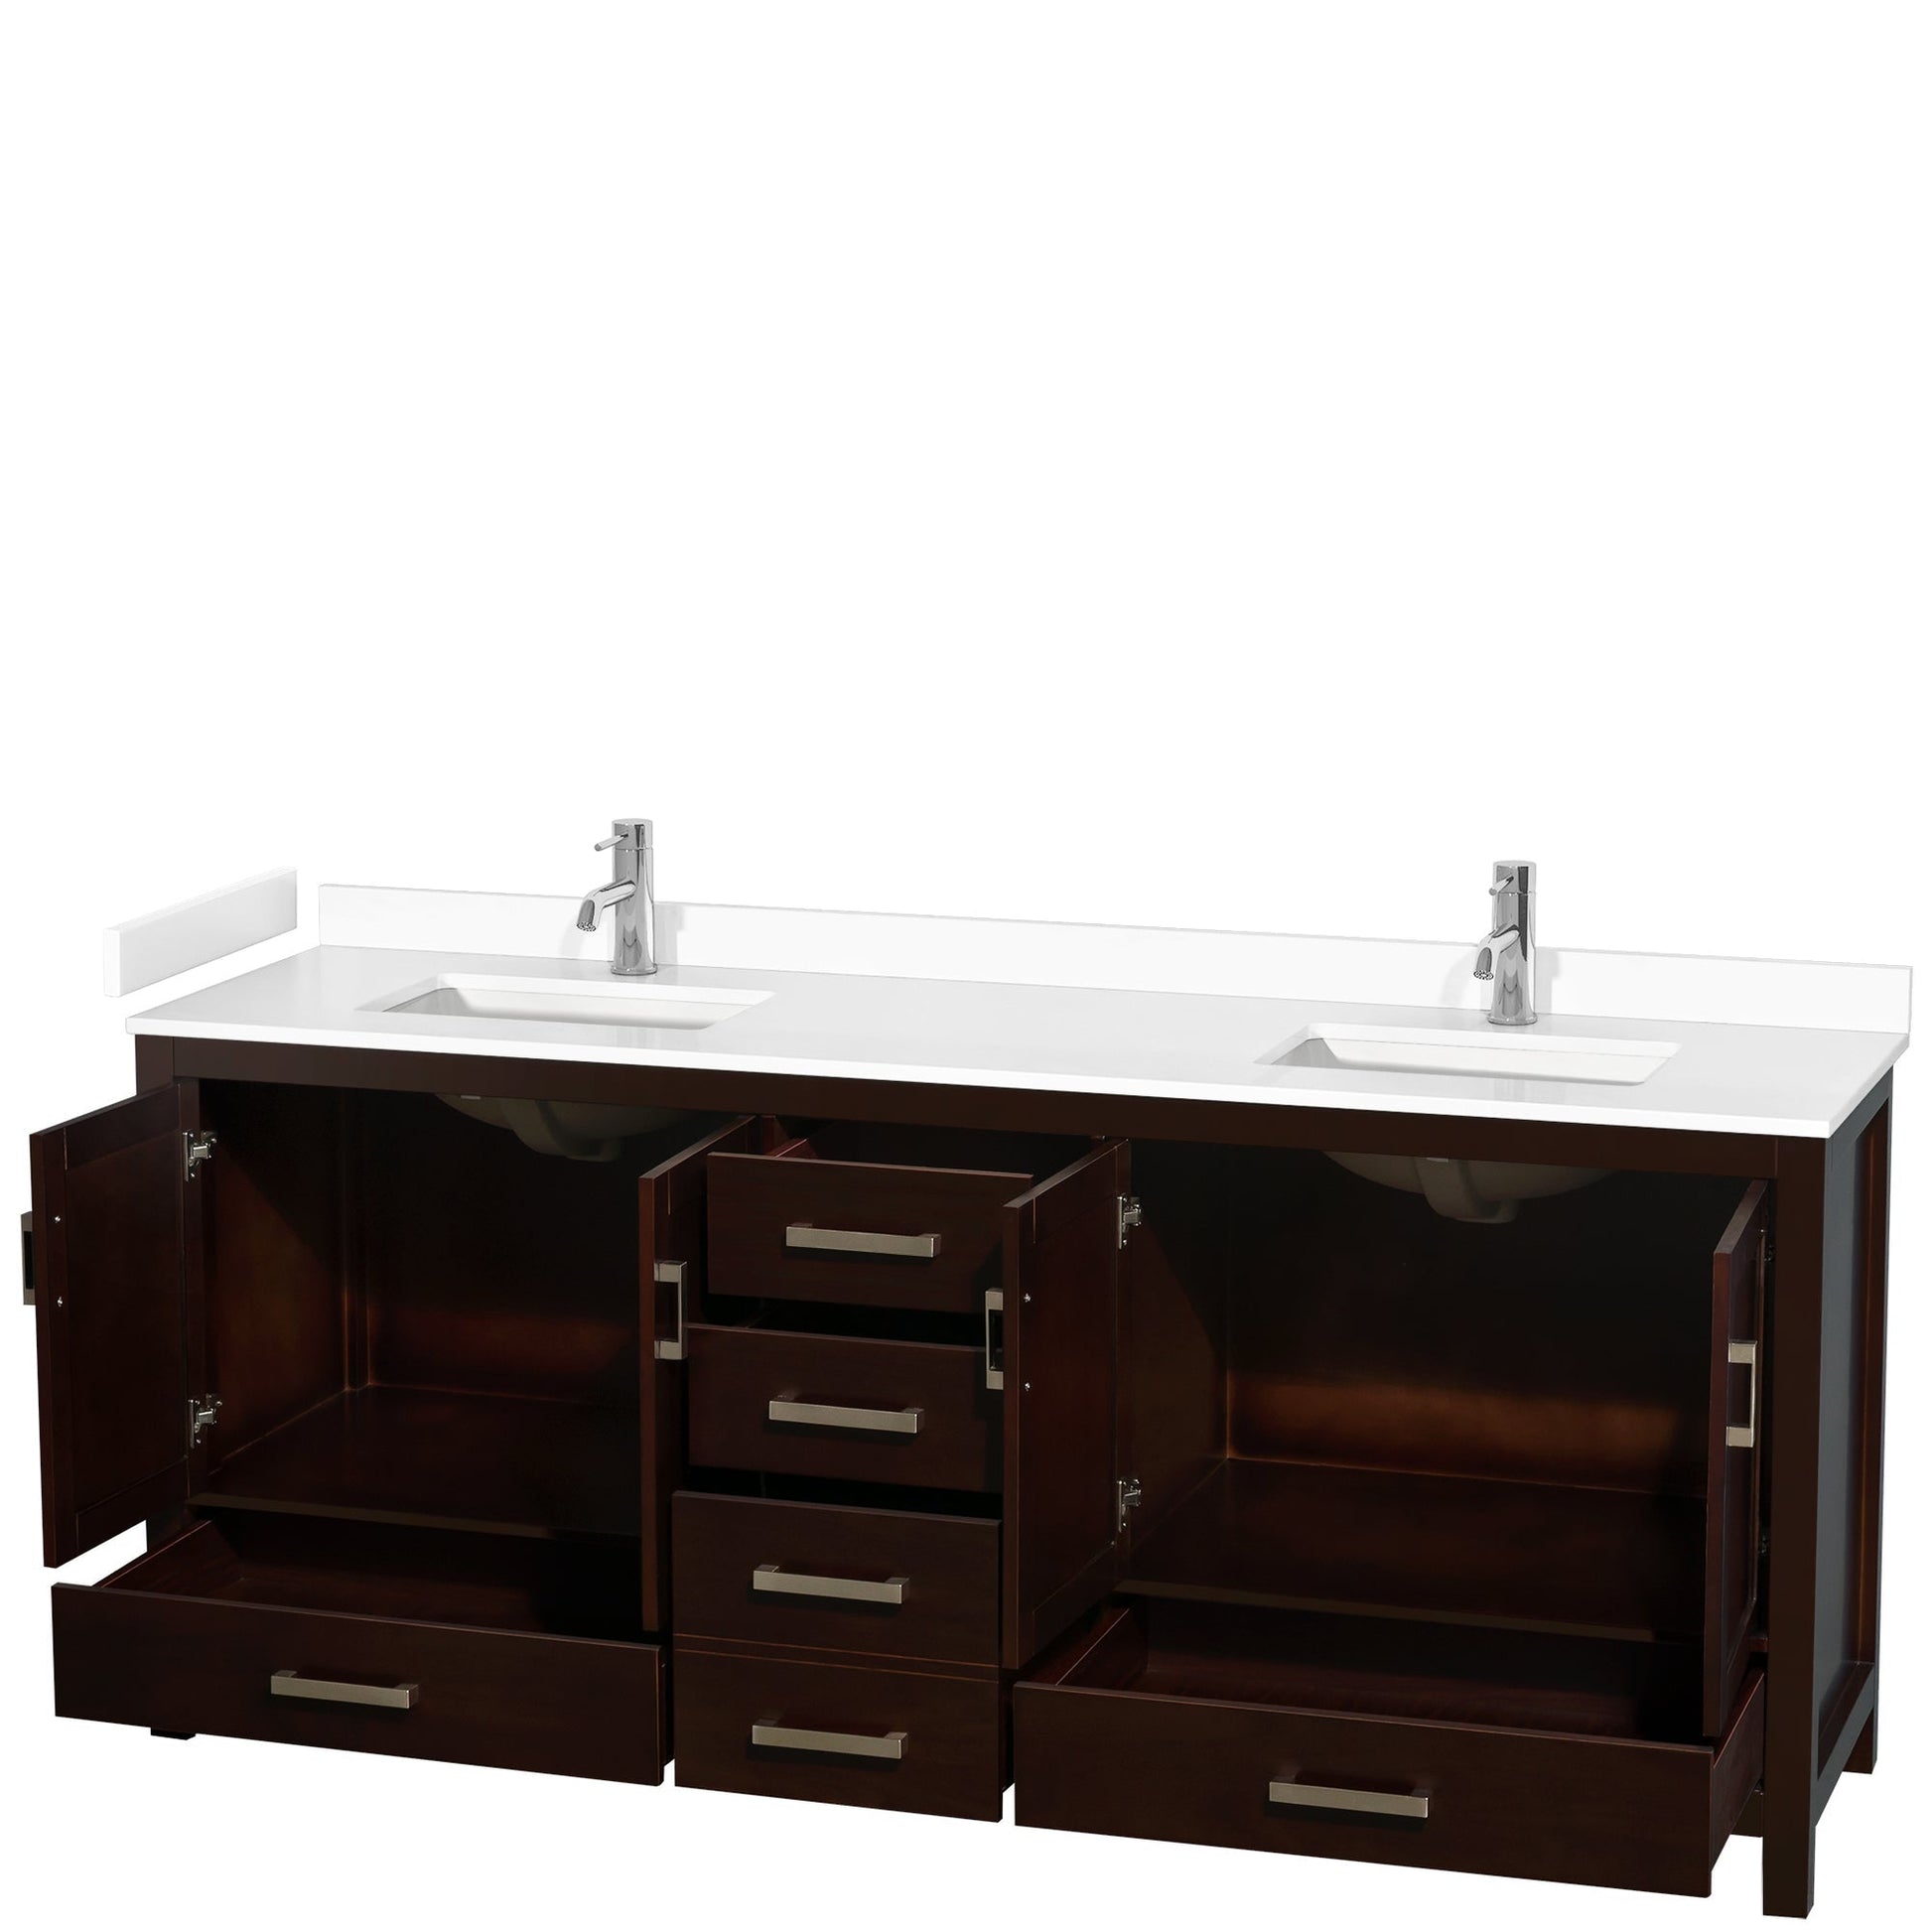 Wyndham Collection Sheffield 80" Double Bathroom Vanity in Espresso, White Cultured Marble Countertop, Undermount Square Sinks, No Mirror